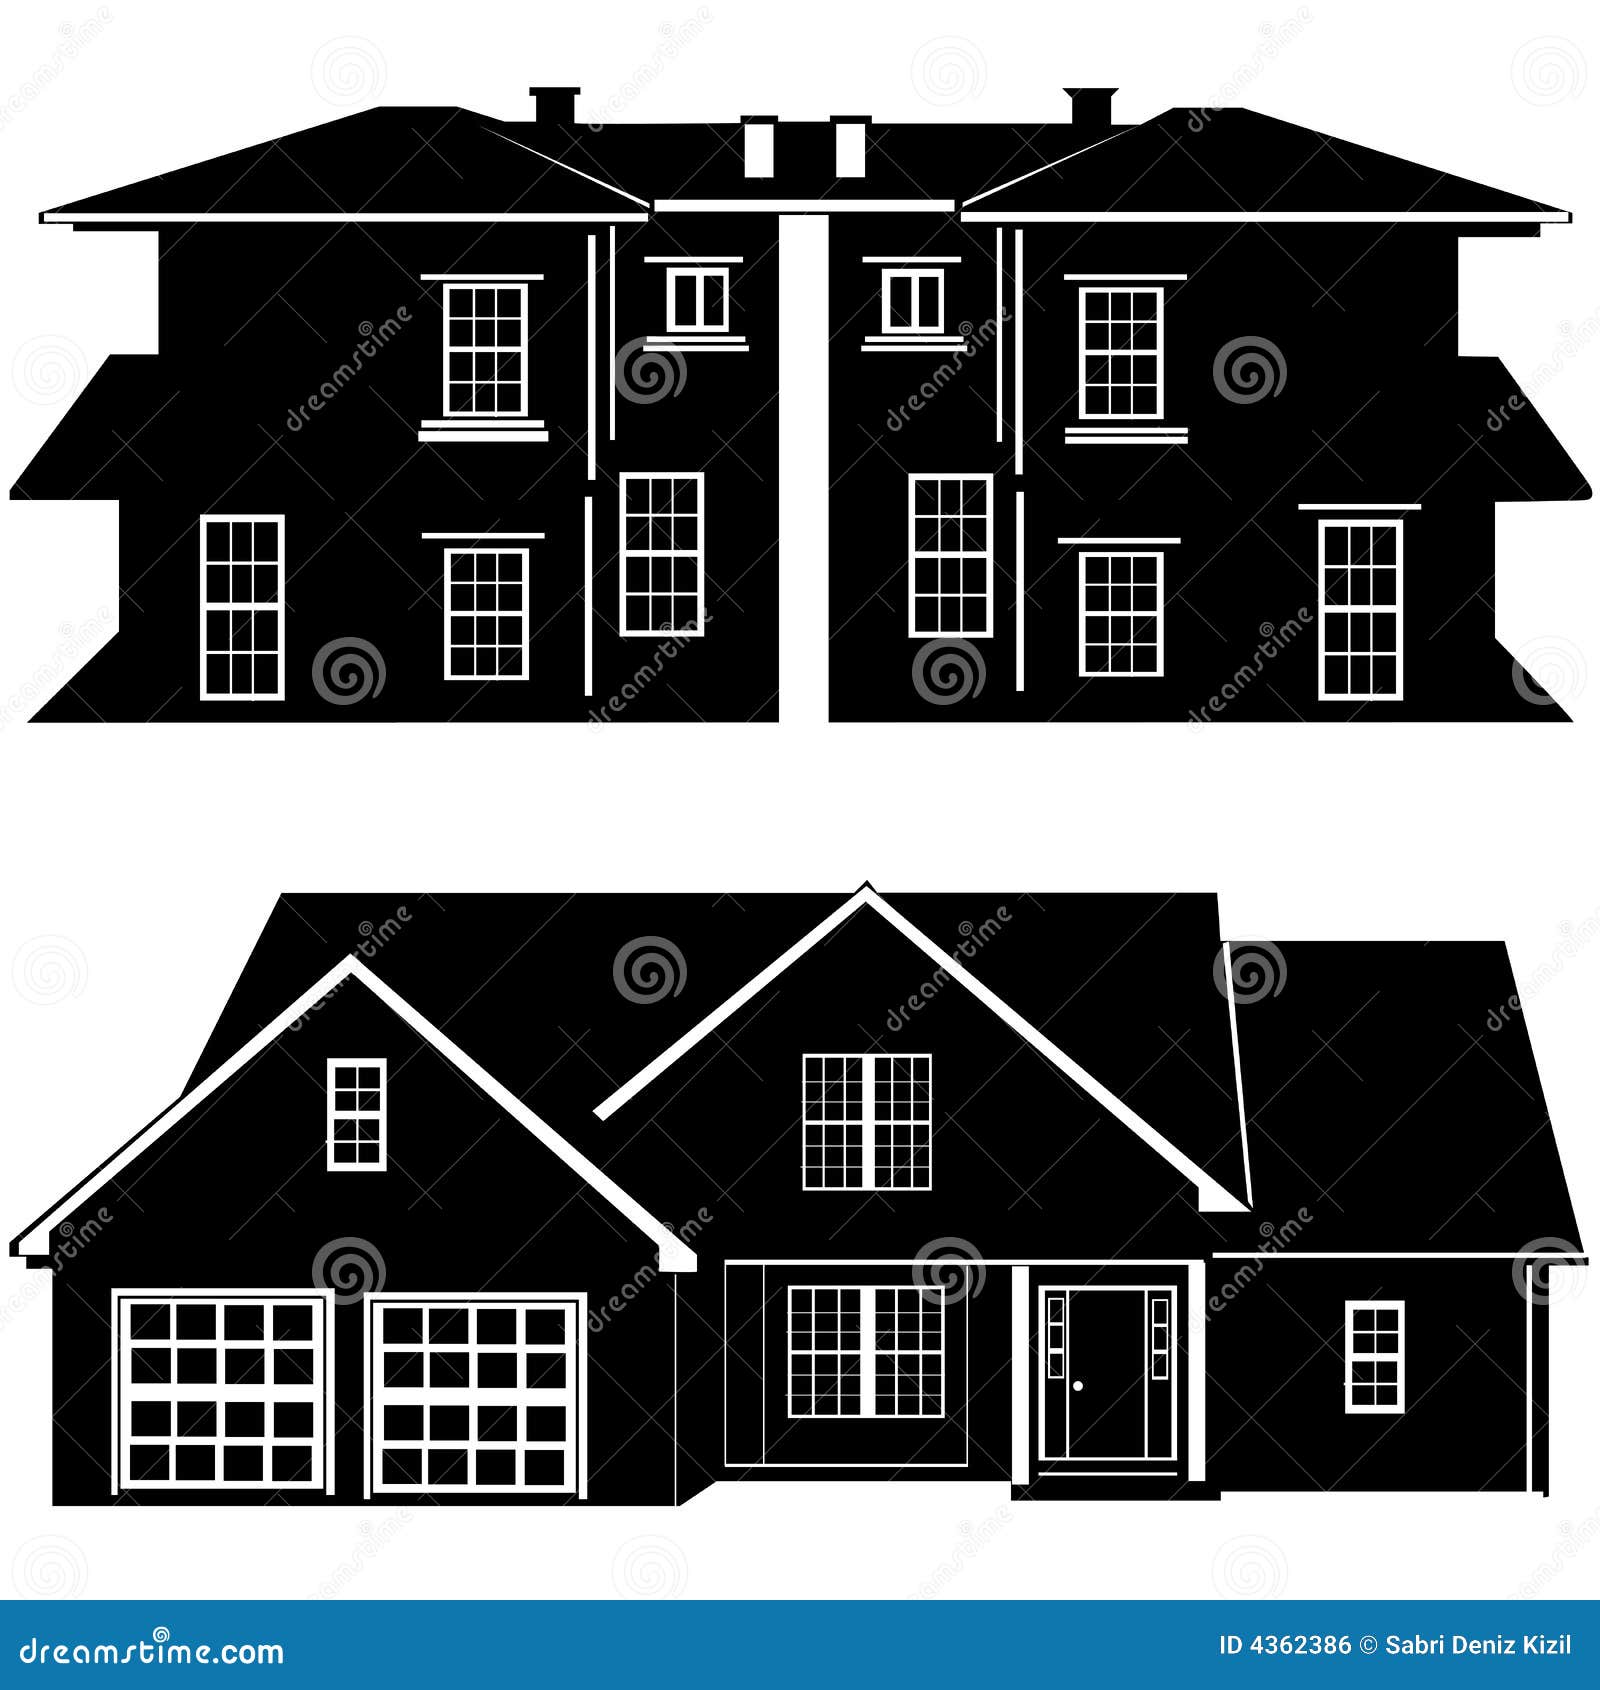 Residences building vector stock vector. Illustration of house - 4362386